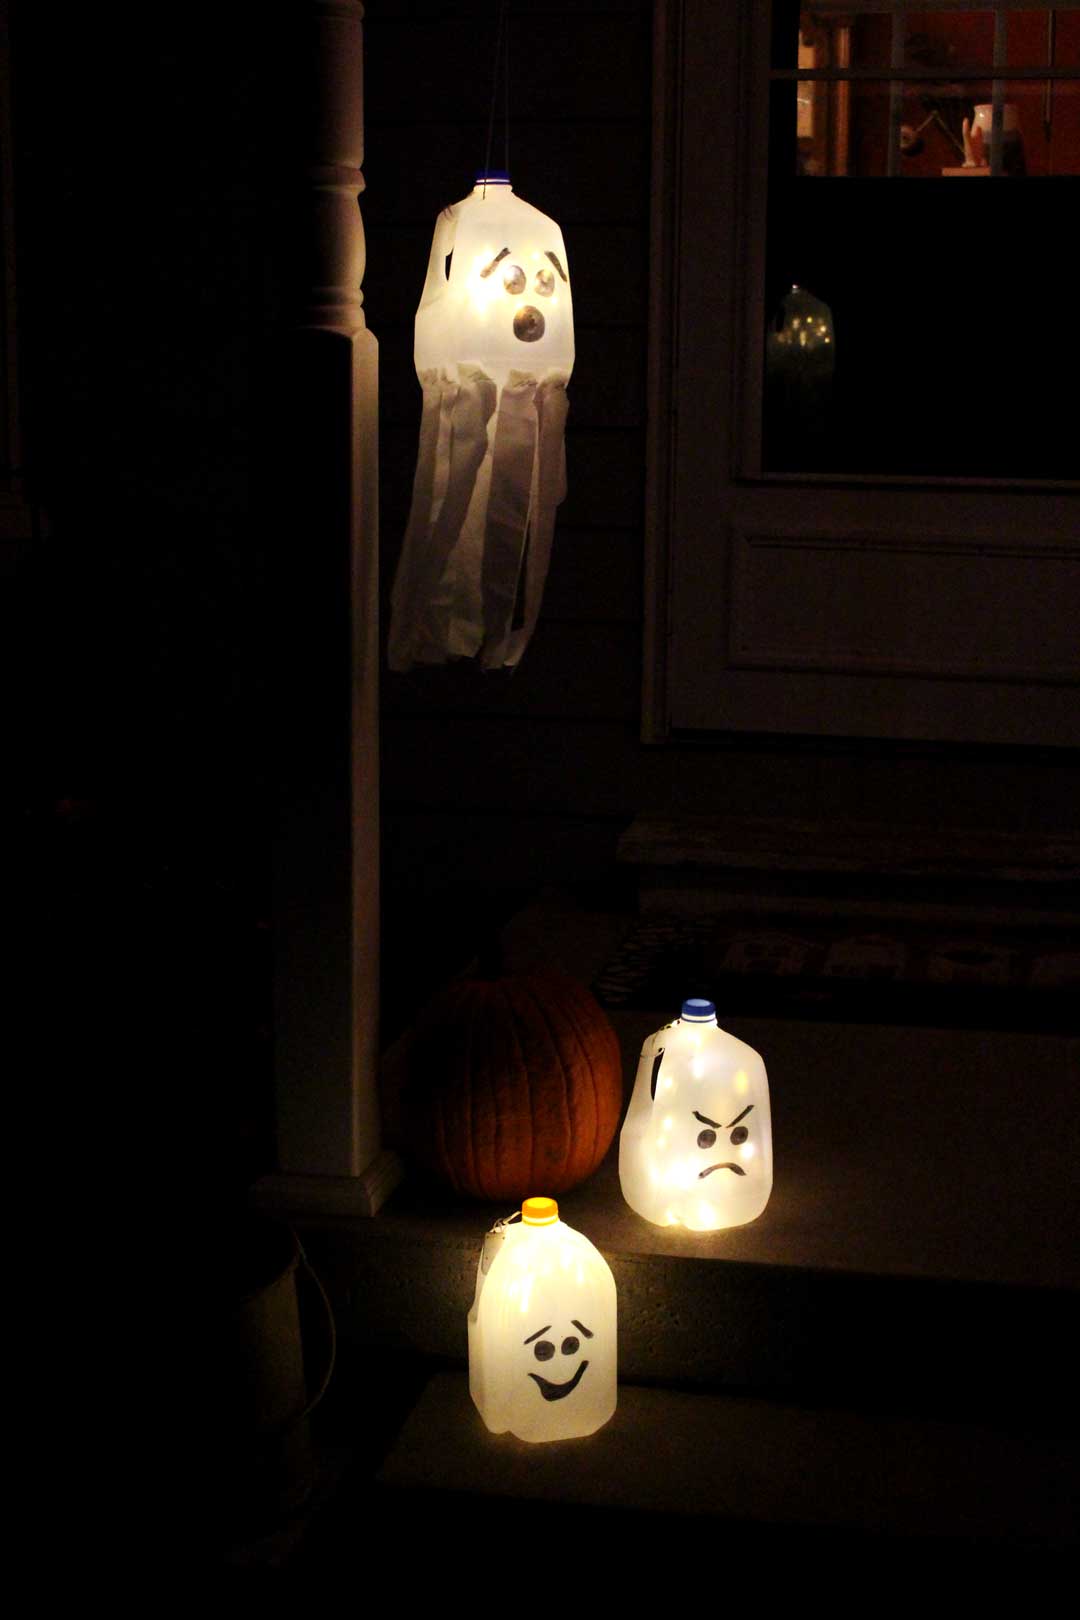 Recycled milk jugs with faces drawn on them to create glowing ghost luminaries hanging on a porch at night.